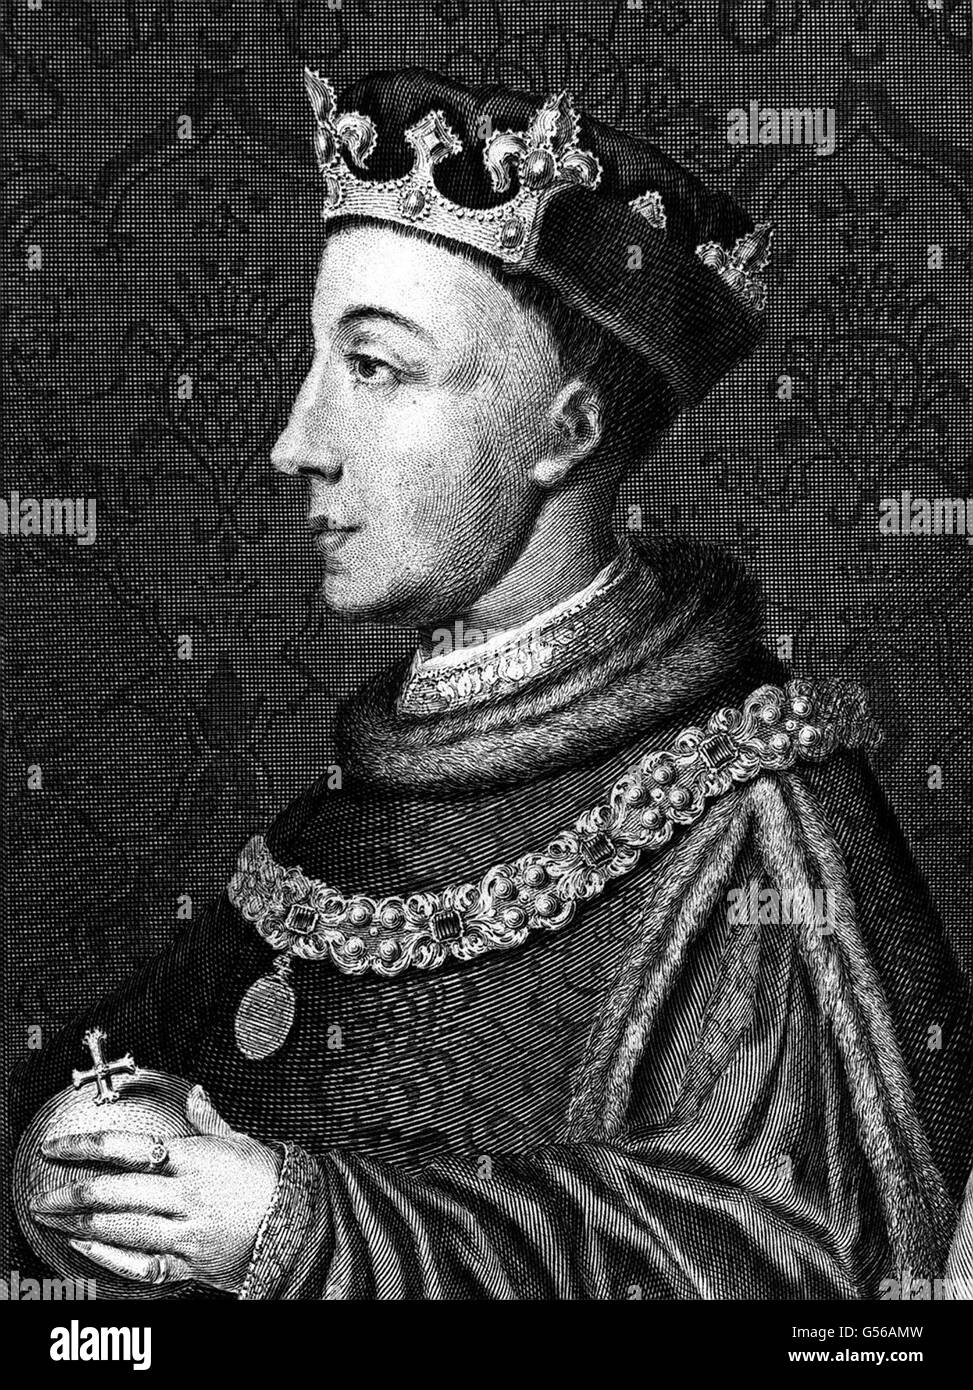 KING HENRY V : A portrait of King Henry V (Henry of Monmouth), King of England 1413-1422. Henry (1387-1422) was the son of King Henry IV. A notable warrior Prince and King, Henry is most famous for his defeat of the French army at the Battle of Agincourt in 1415. Stock Photo